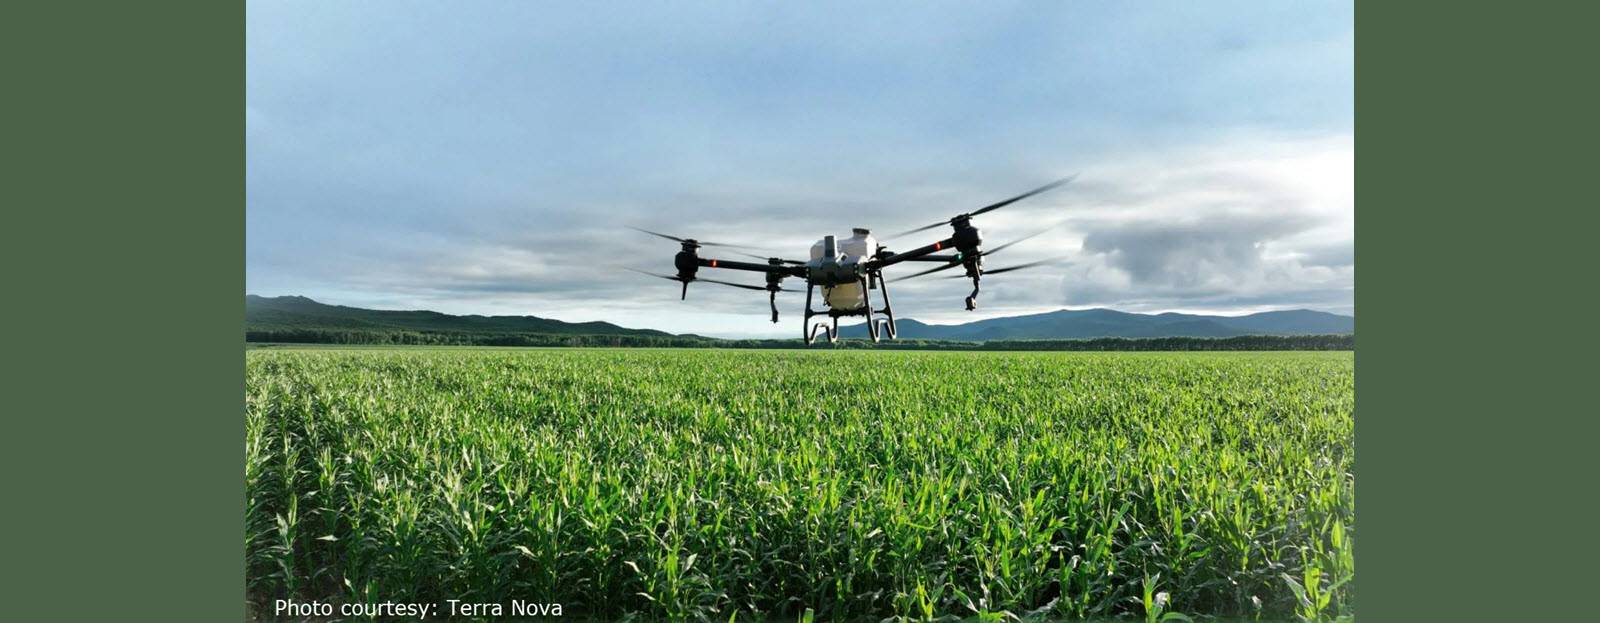 New drone pesticide application rules unveiled